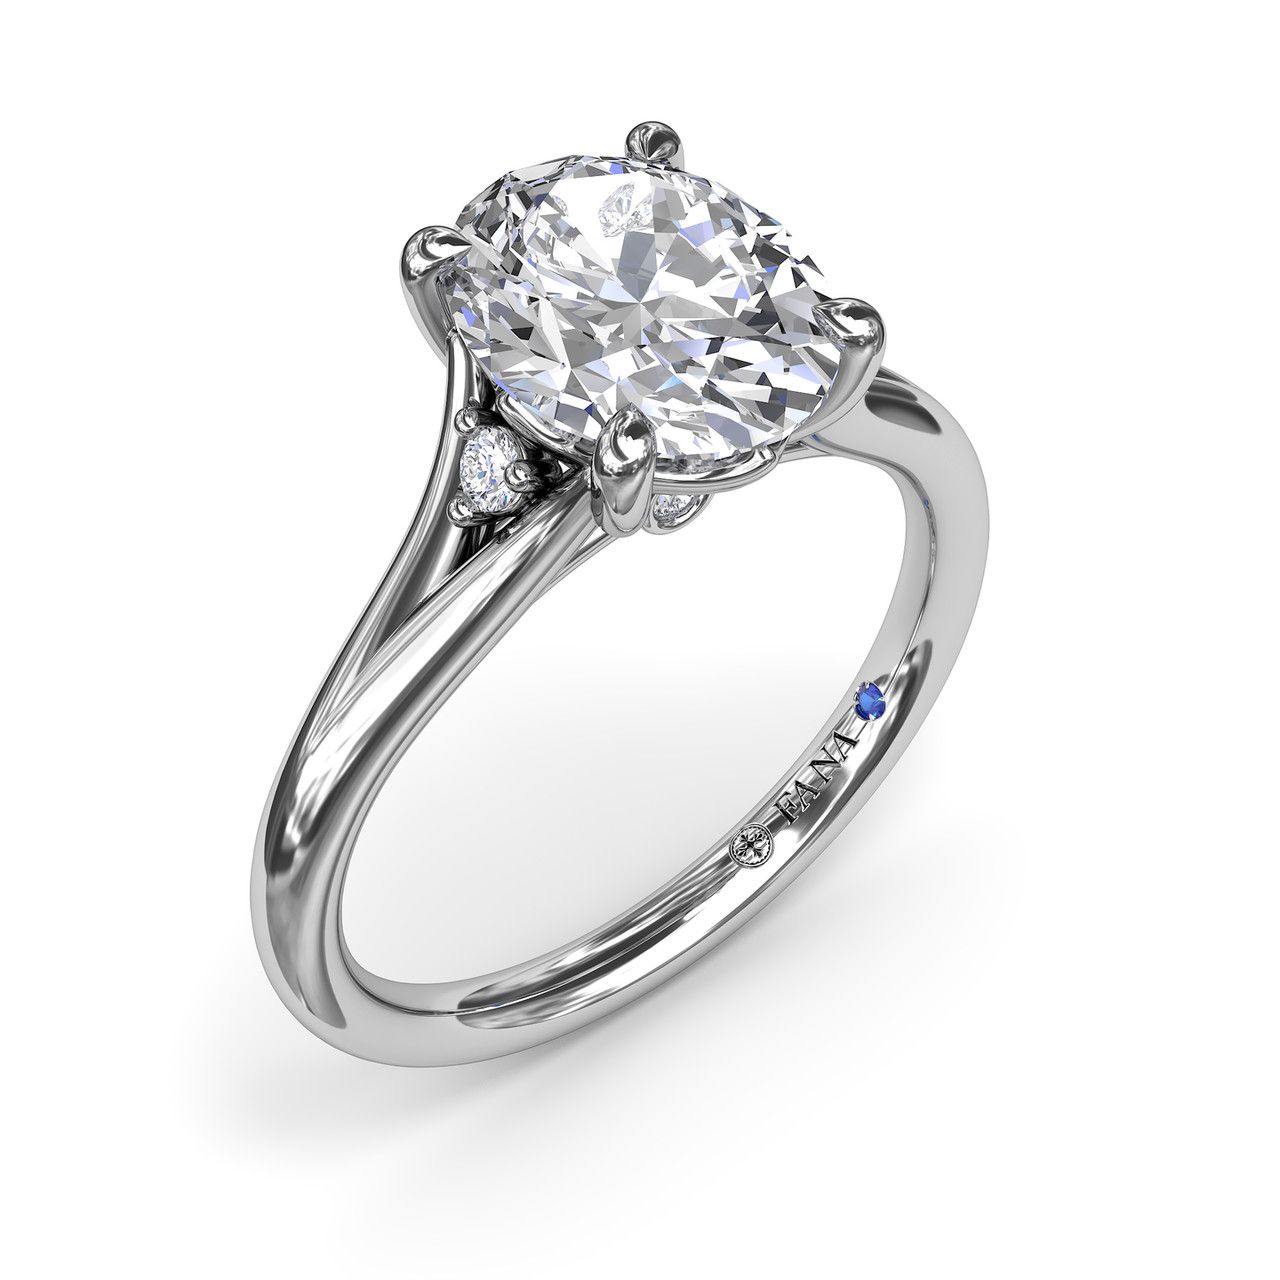 14K WHITE GOLD SPLIT SHANK SEMI-MOUNT RING SIZE 6.5 WITH 4=0.06TW ROUND G-H VS2-SI1 DIAMONDS AND ONE ROUND BLUE SAPPHIRE (3.72 GRAMS)